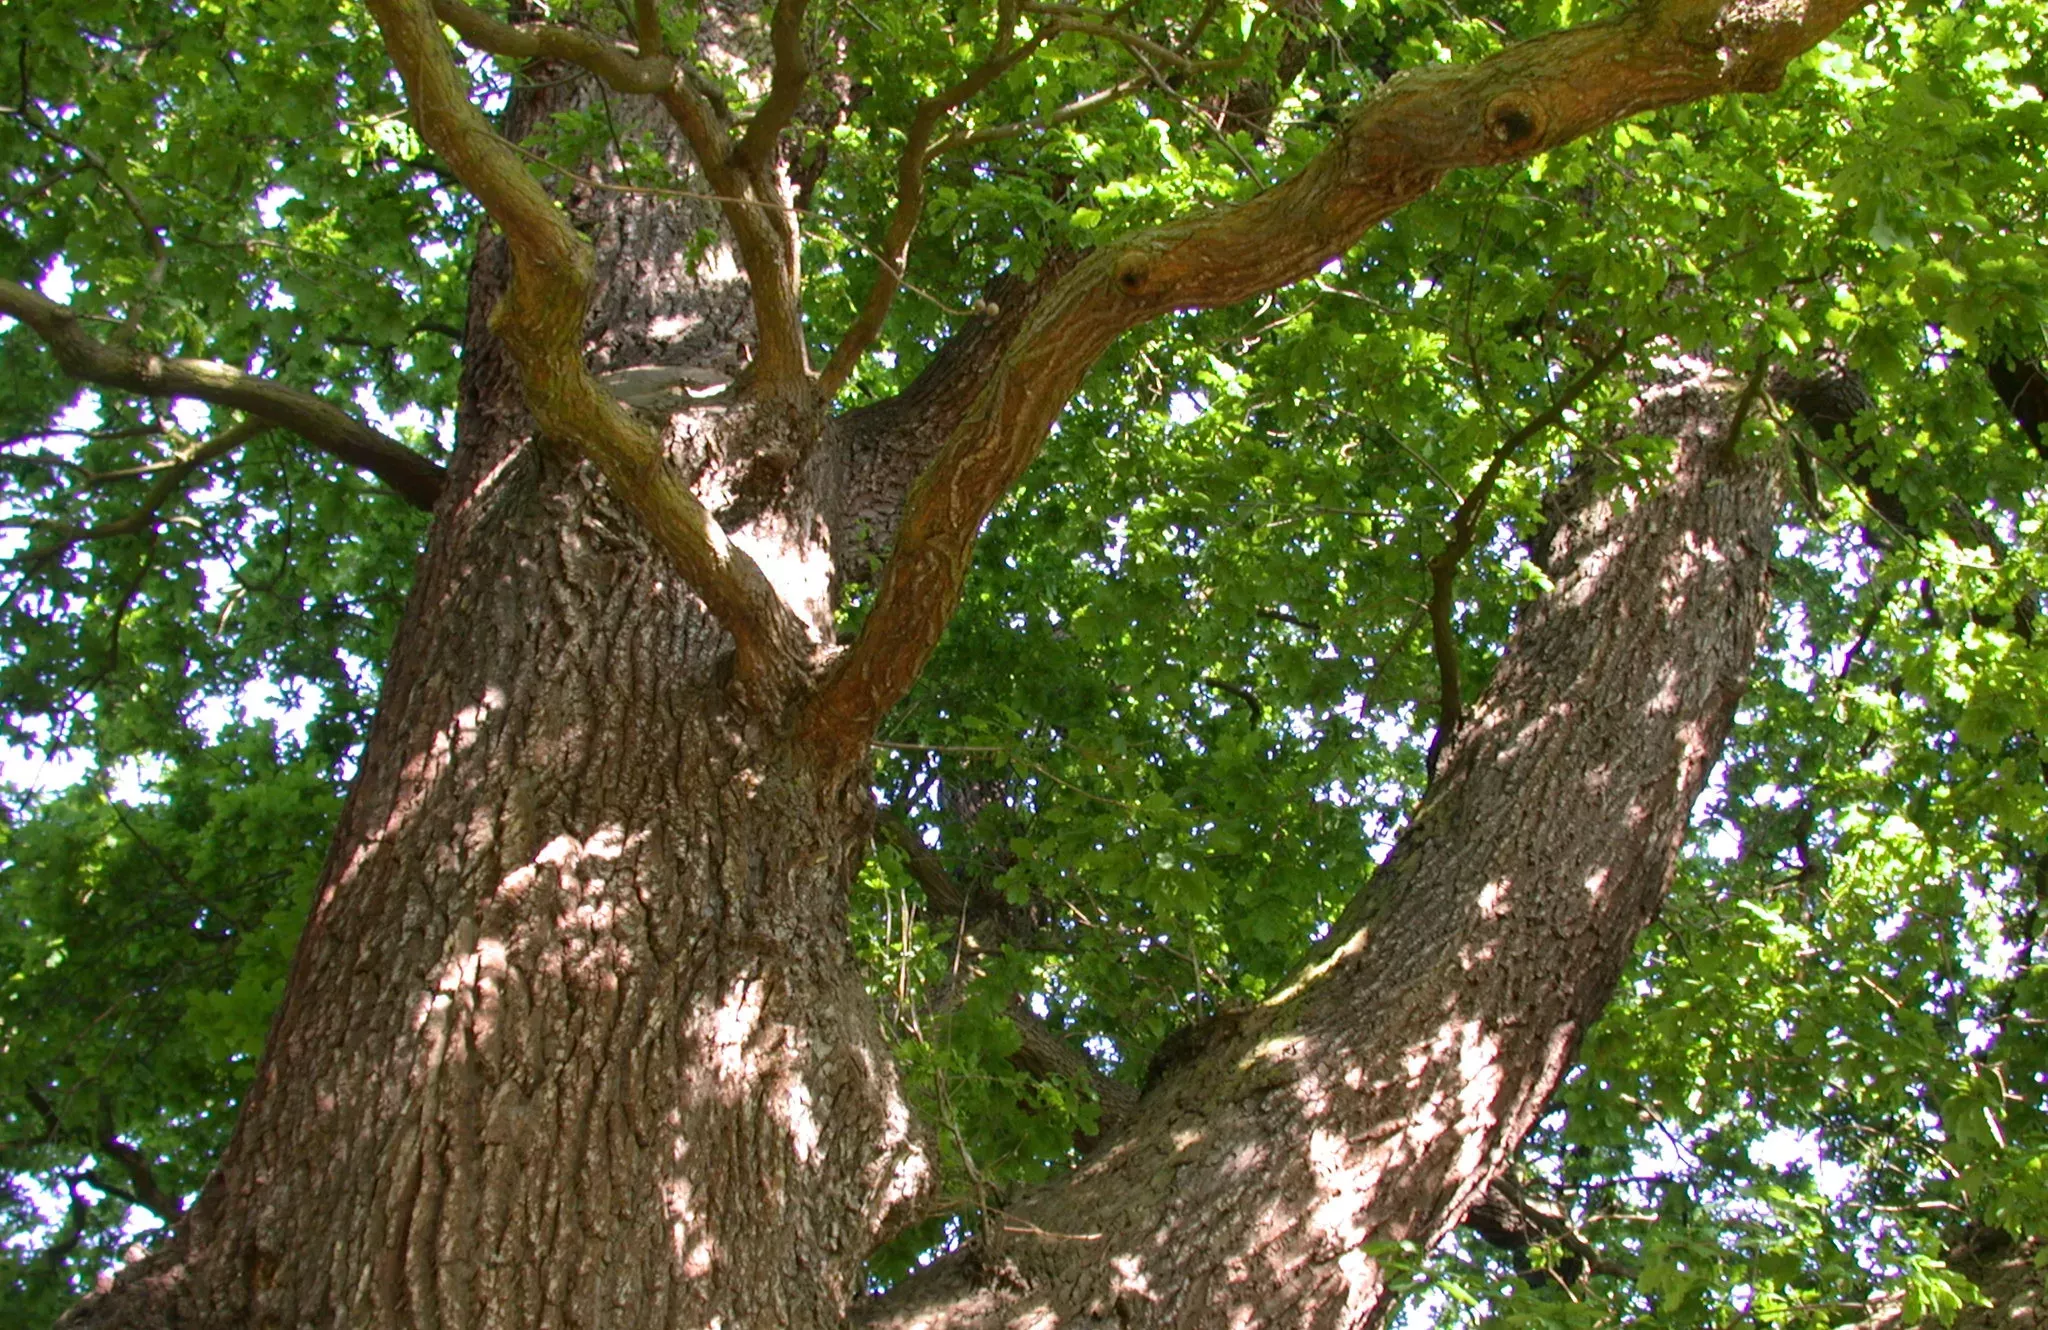 Looking up the trunk of an English oak (Quercus robur)